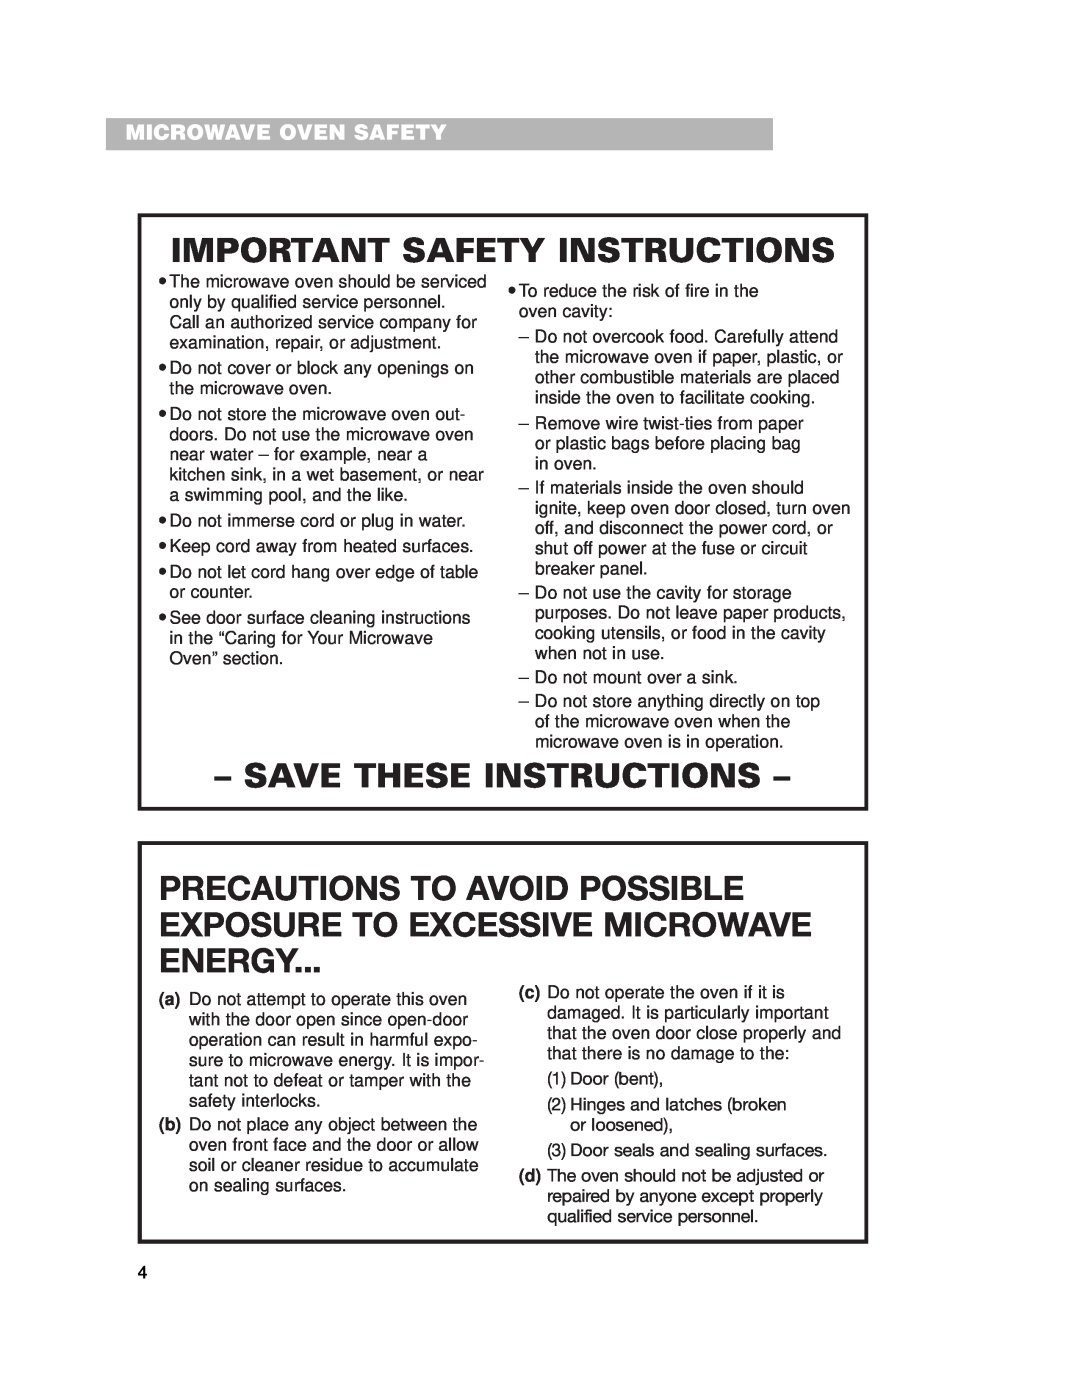 Whirlpool CMT102SG Precautions To Avoid Possible Exposure To Excessive Microwave Energy, Microwave Oven Safety 